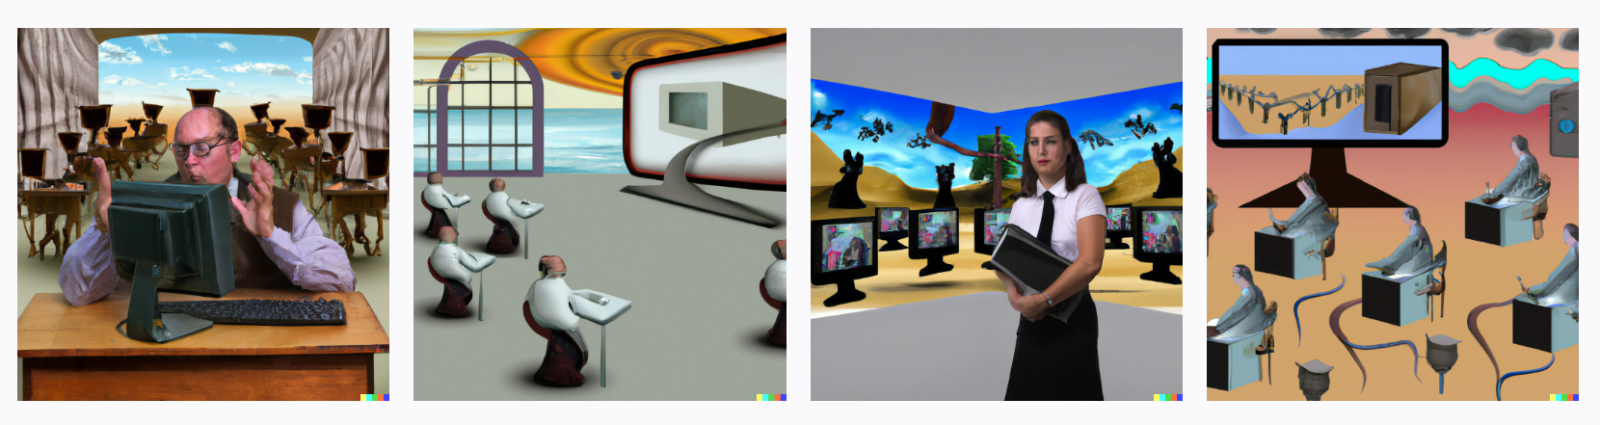 Four square images of a classroom in a surrealist style